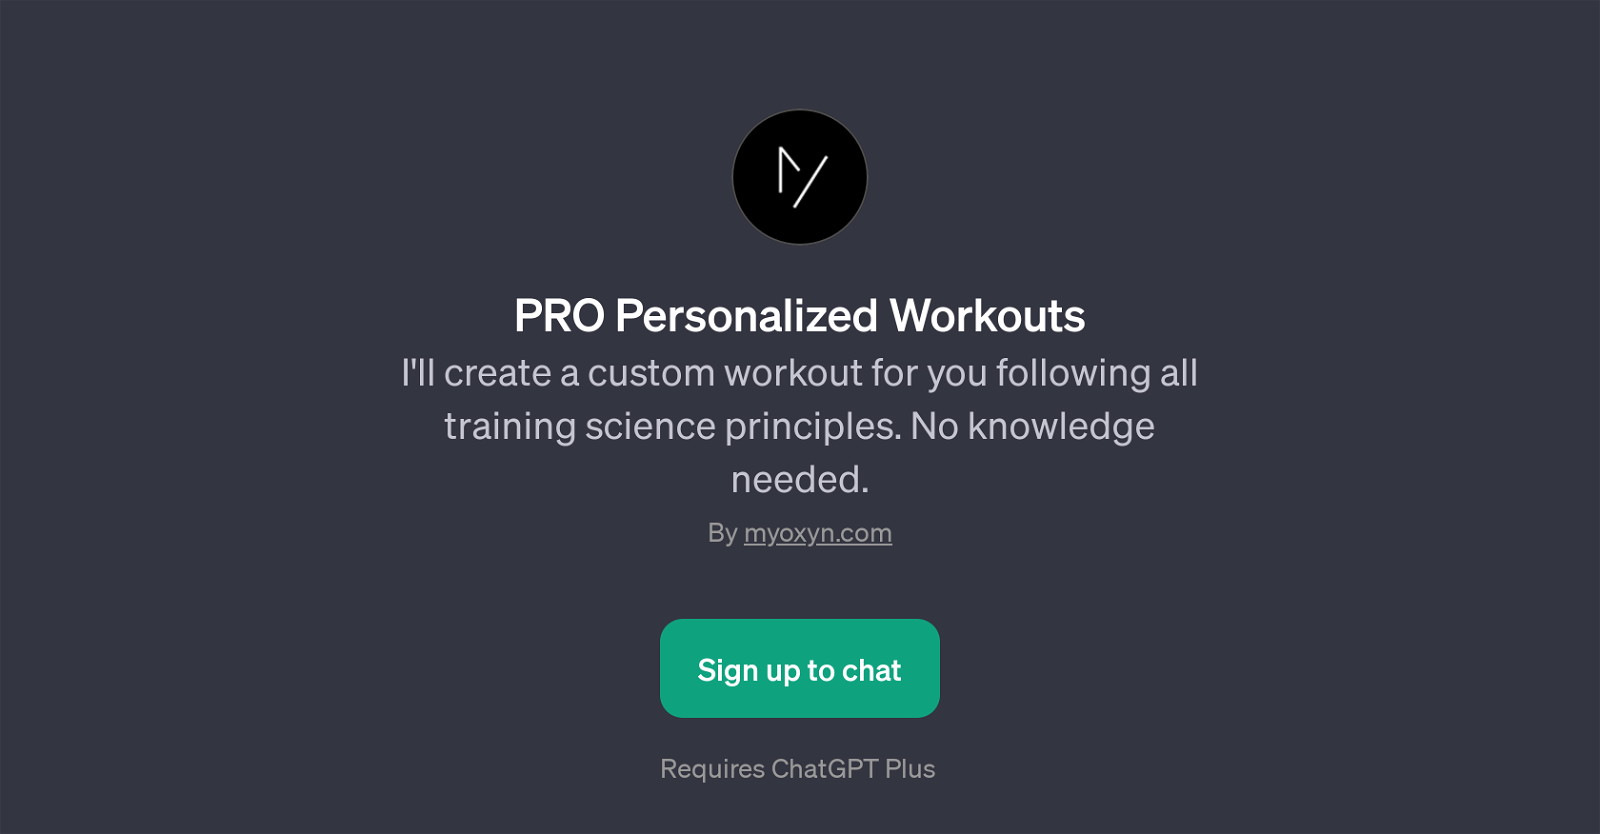 PRO Personalized Workouts website